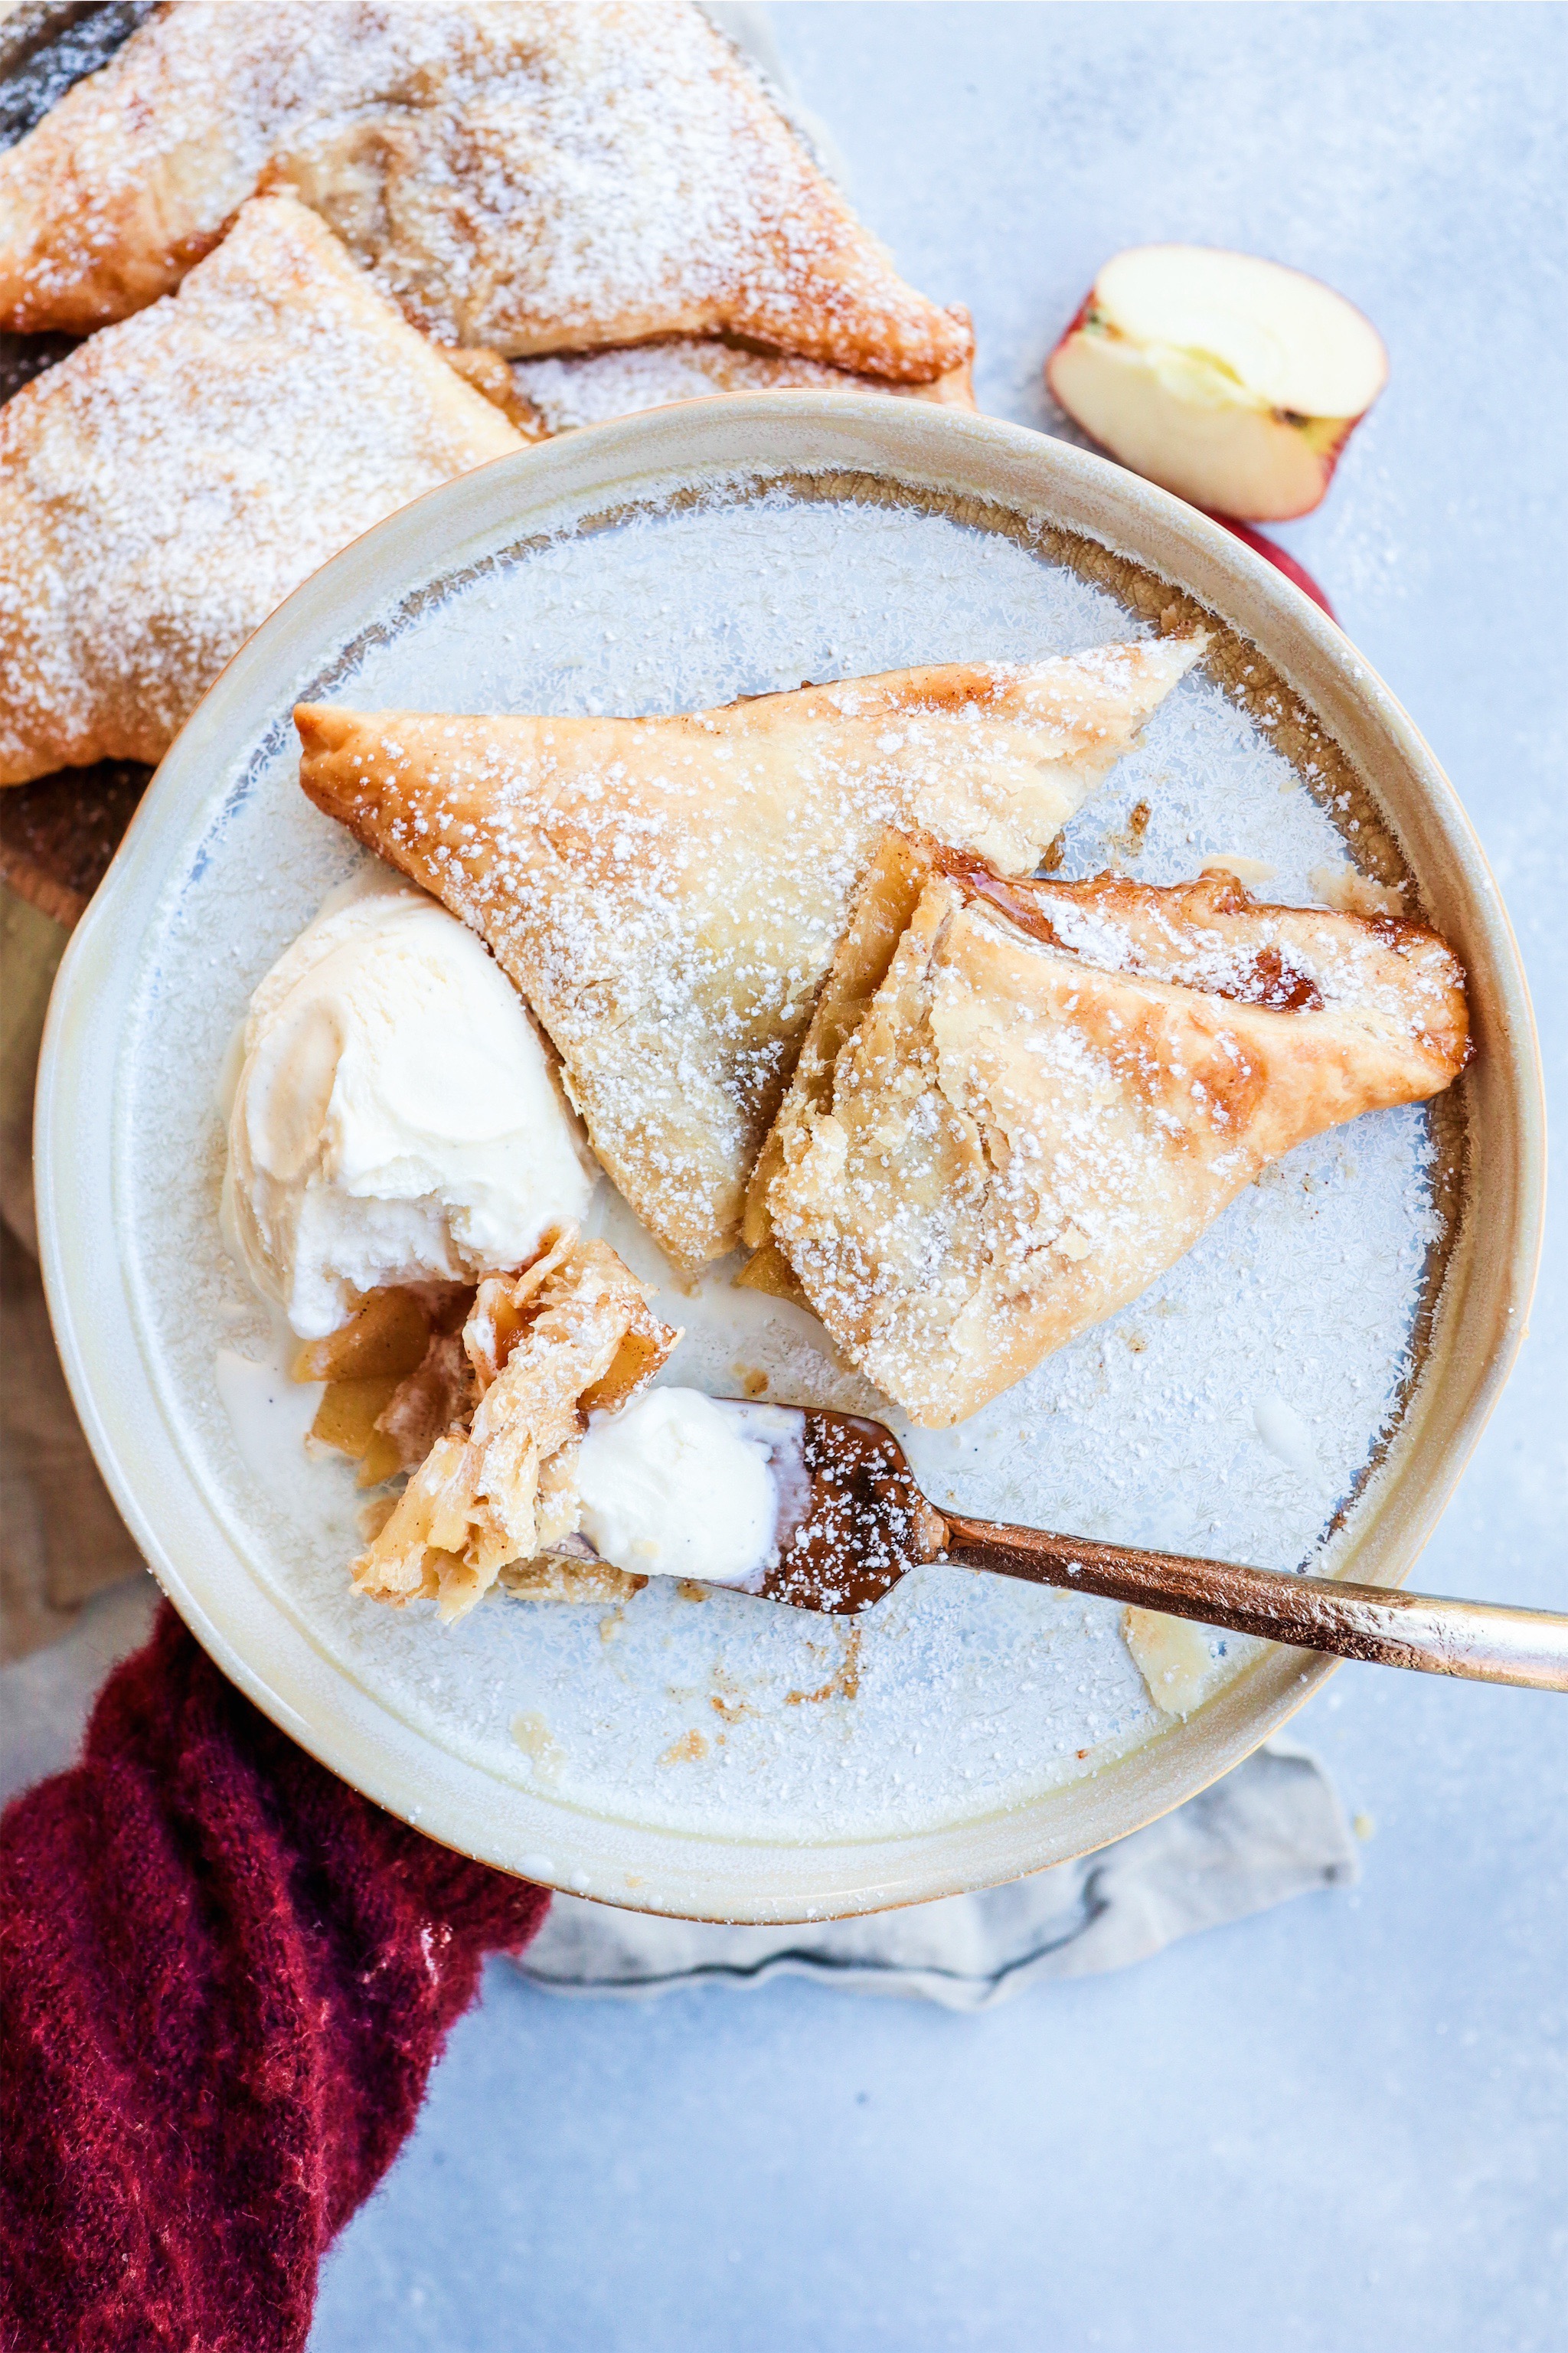 apple turnover with puff pastry